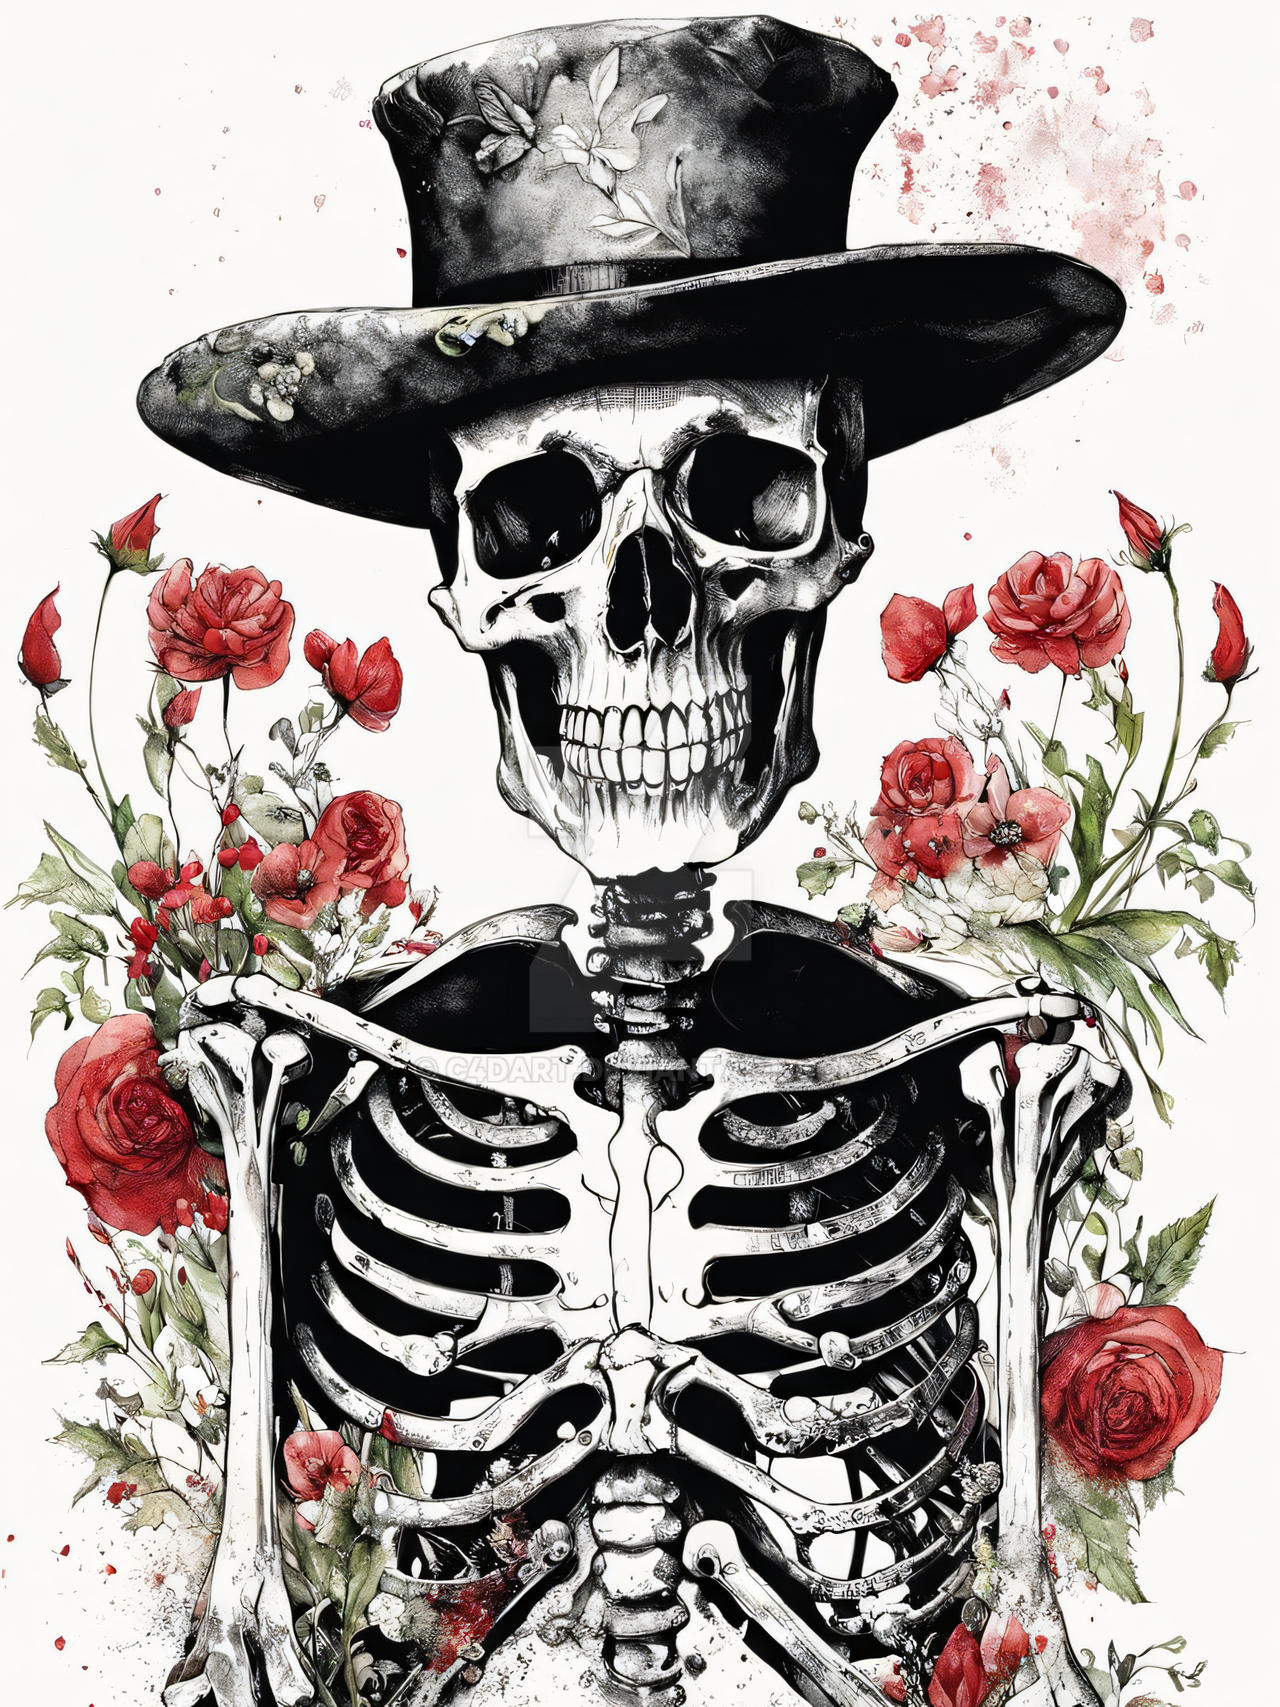 Floral Skeleton With Hat Ink Painting (15) by C4Dart on DeviantArt